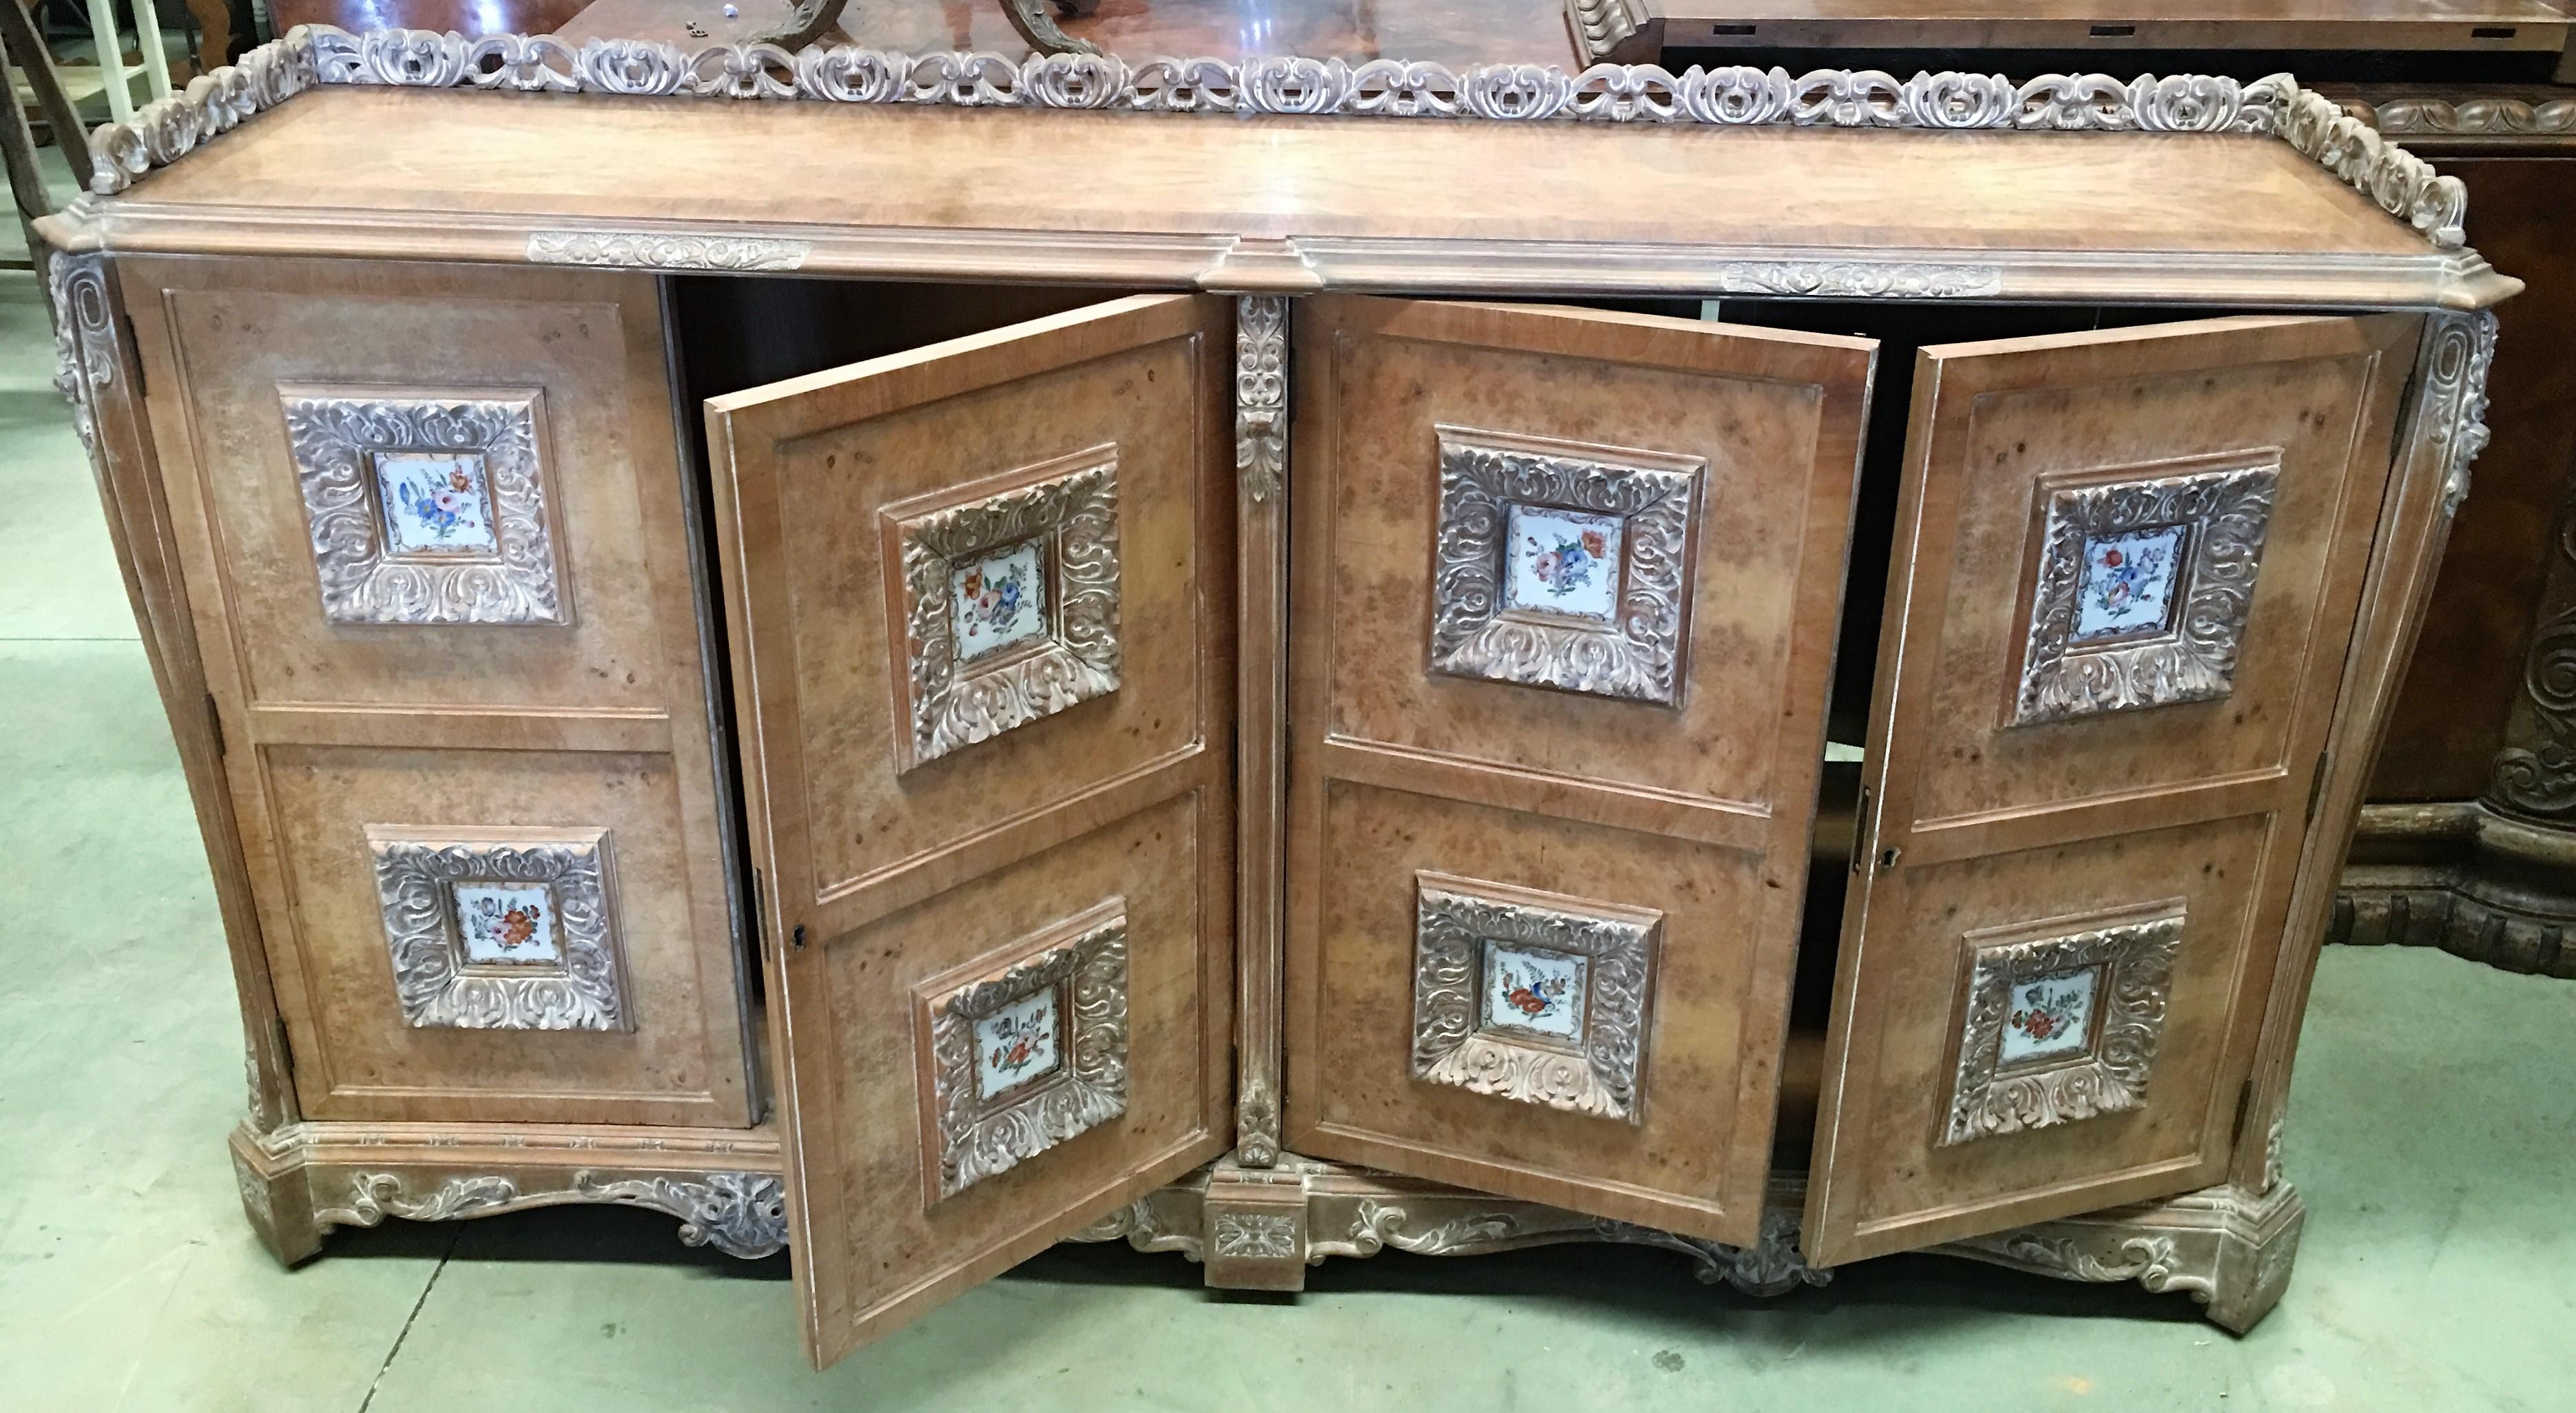 20th Century Spanish Mid-20th Carved Sideboard with Four Decorated Ceramic Panels in Doors